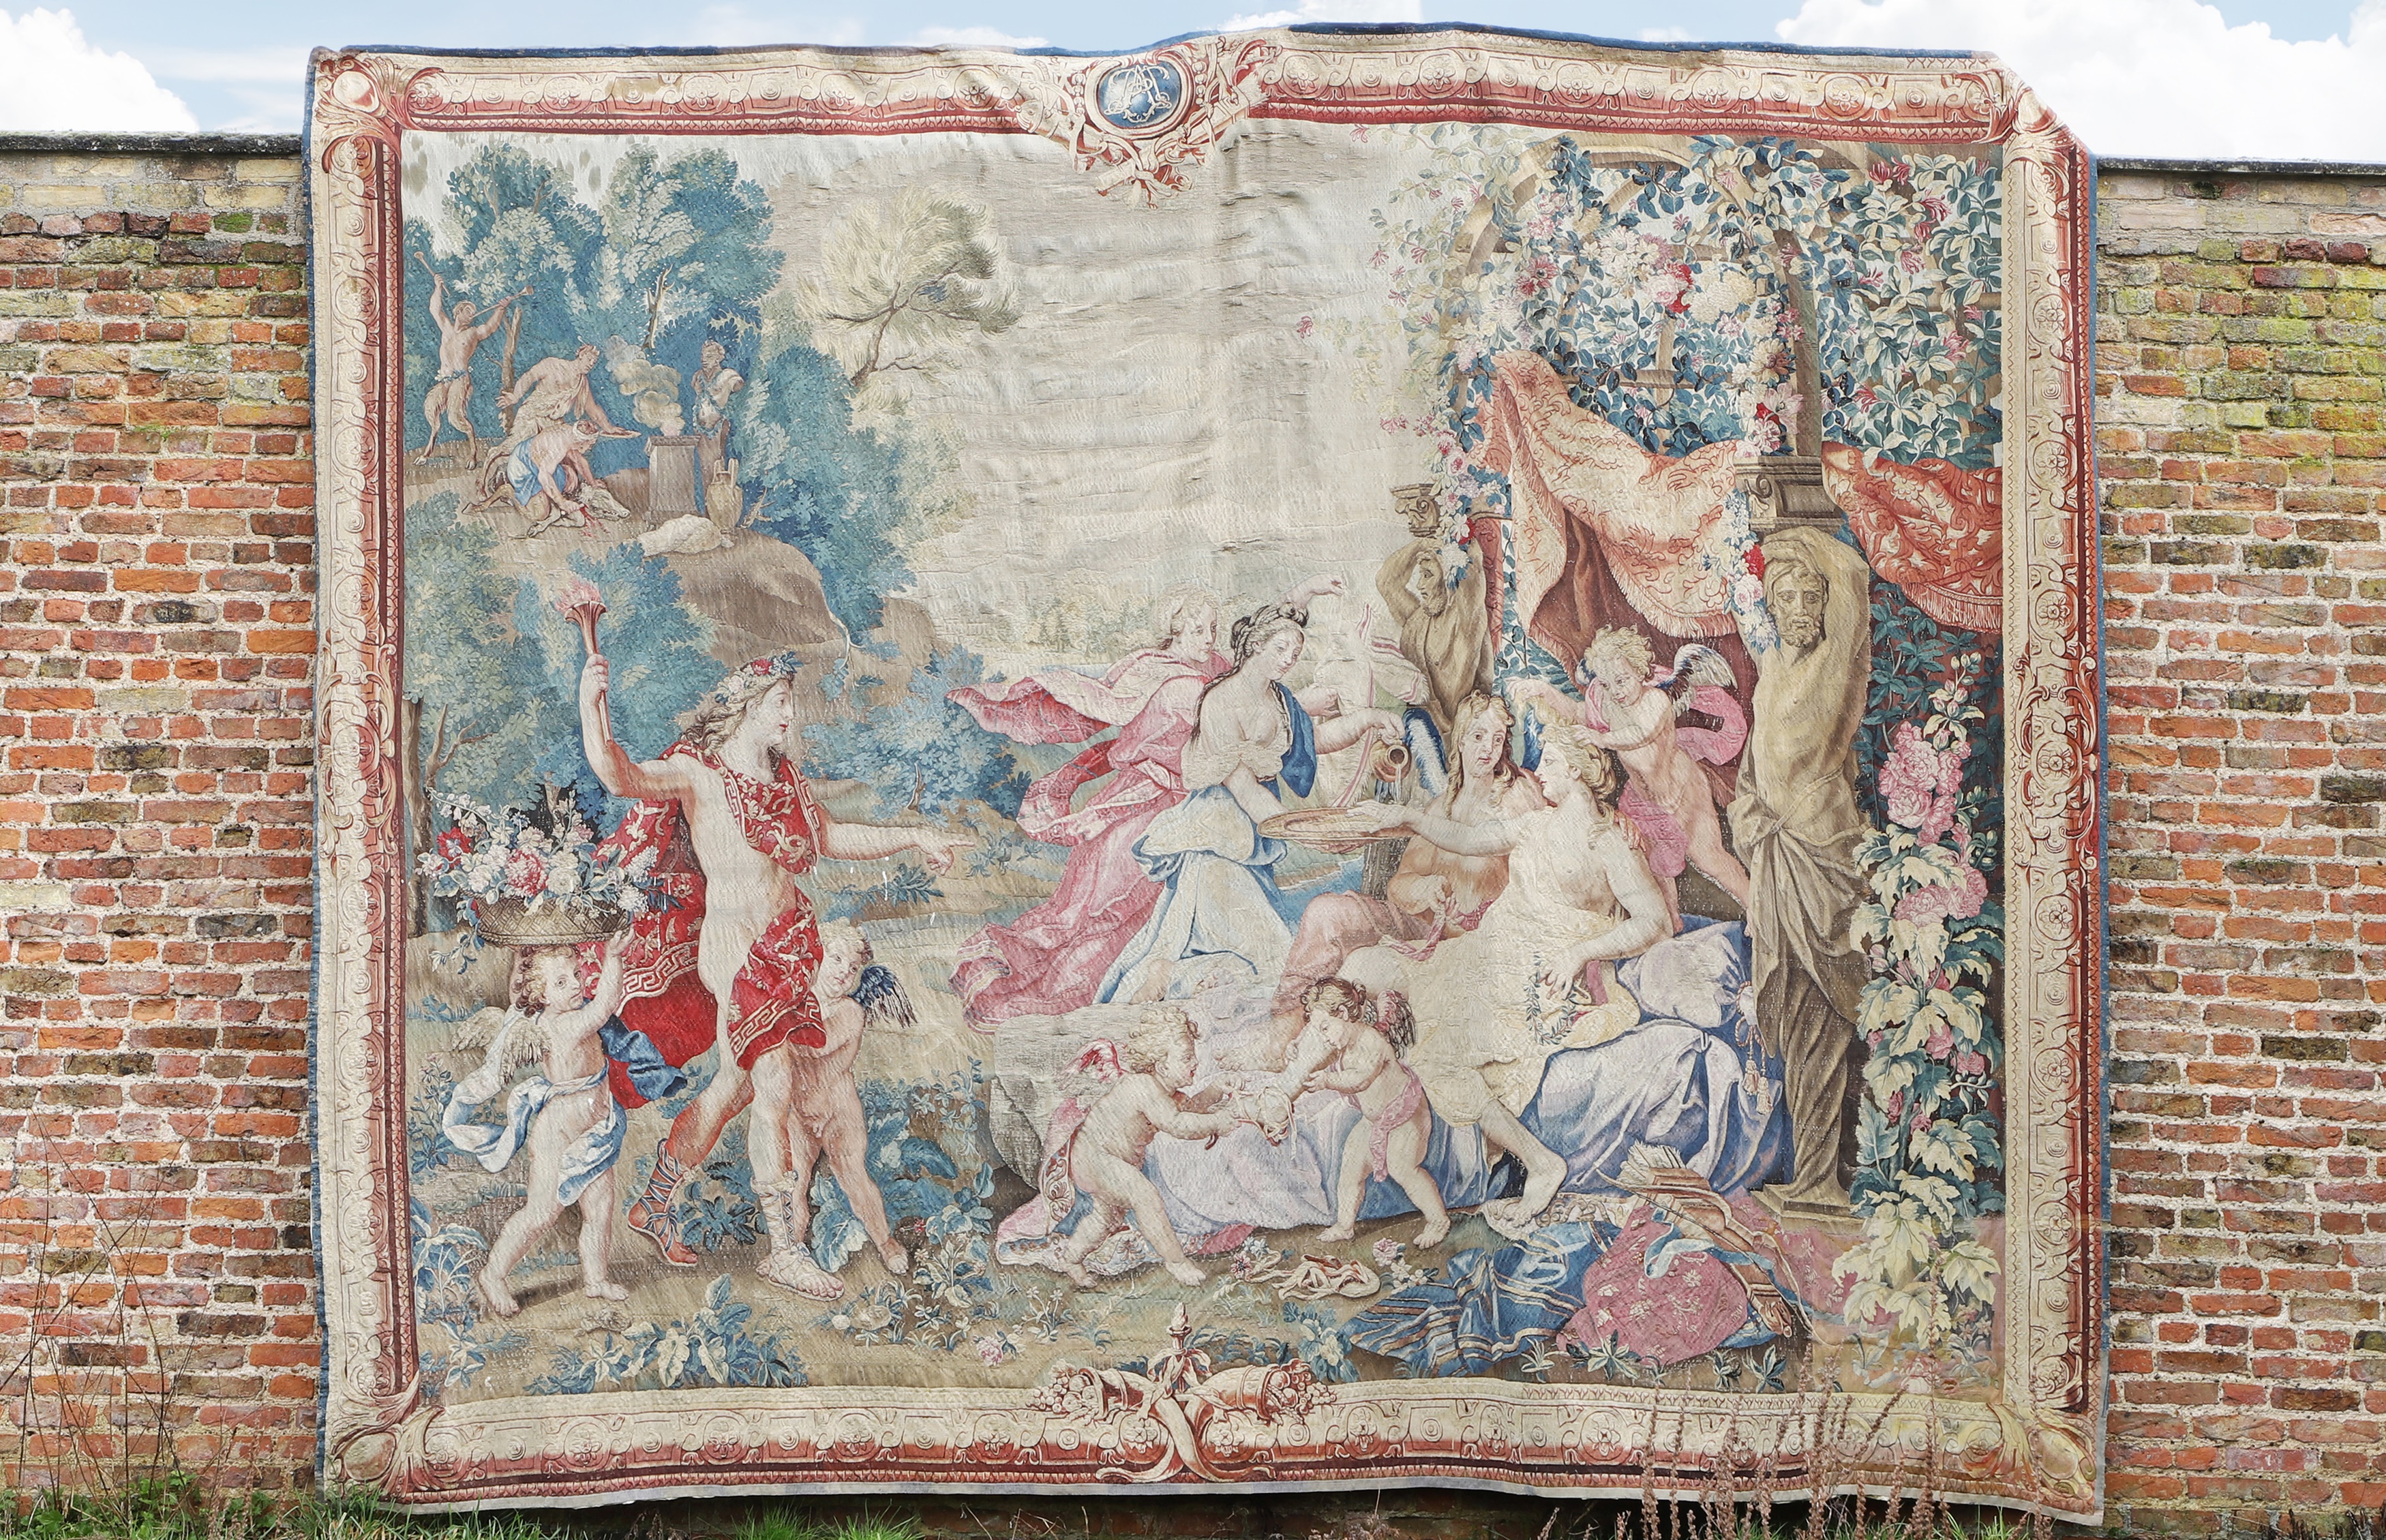 Provenance: Private commission from Gobelins Manufactory, Paris; The Shelswell-White Collection, Bantry House, Co. Cork, Ireland; acquired in a private sale from the above; a private collection, thence by descent to the present owner.